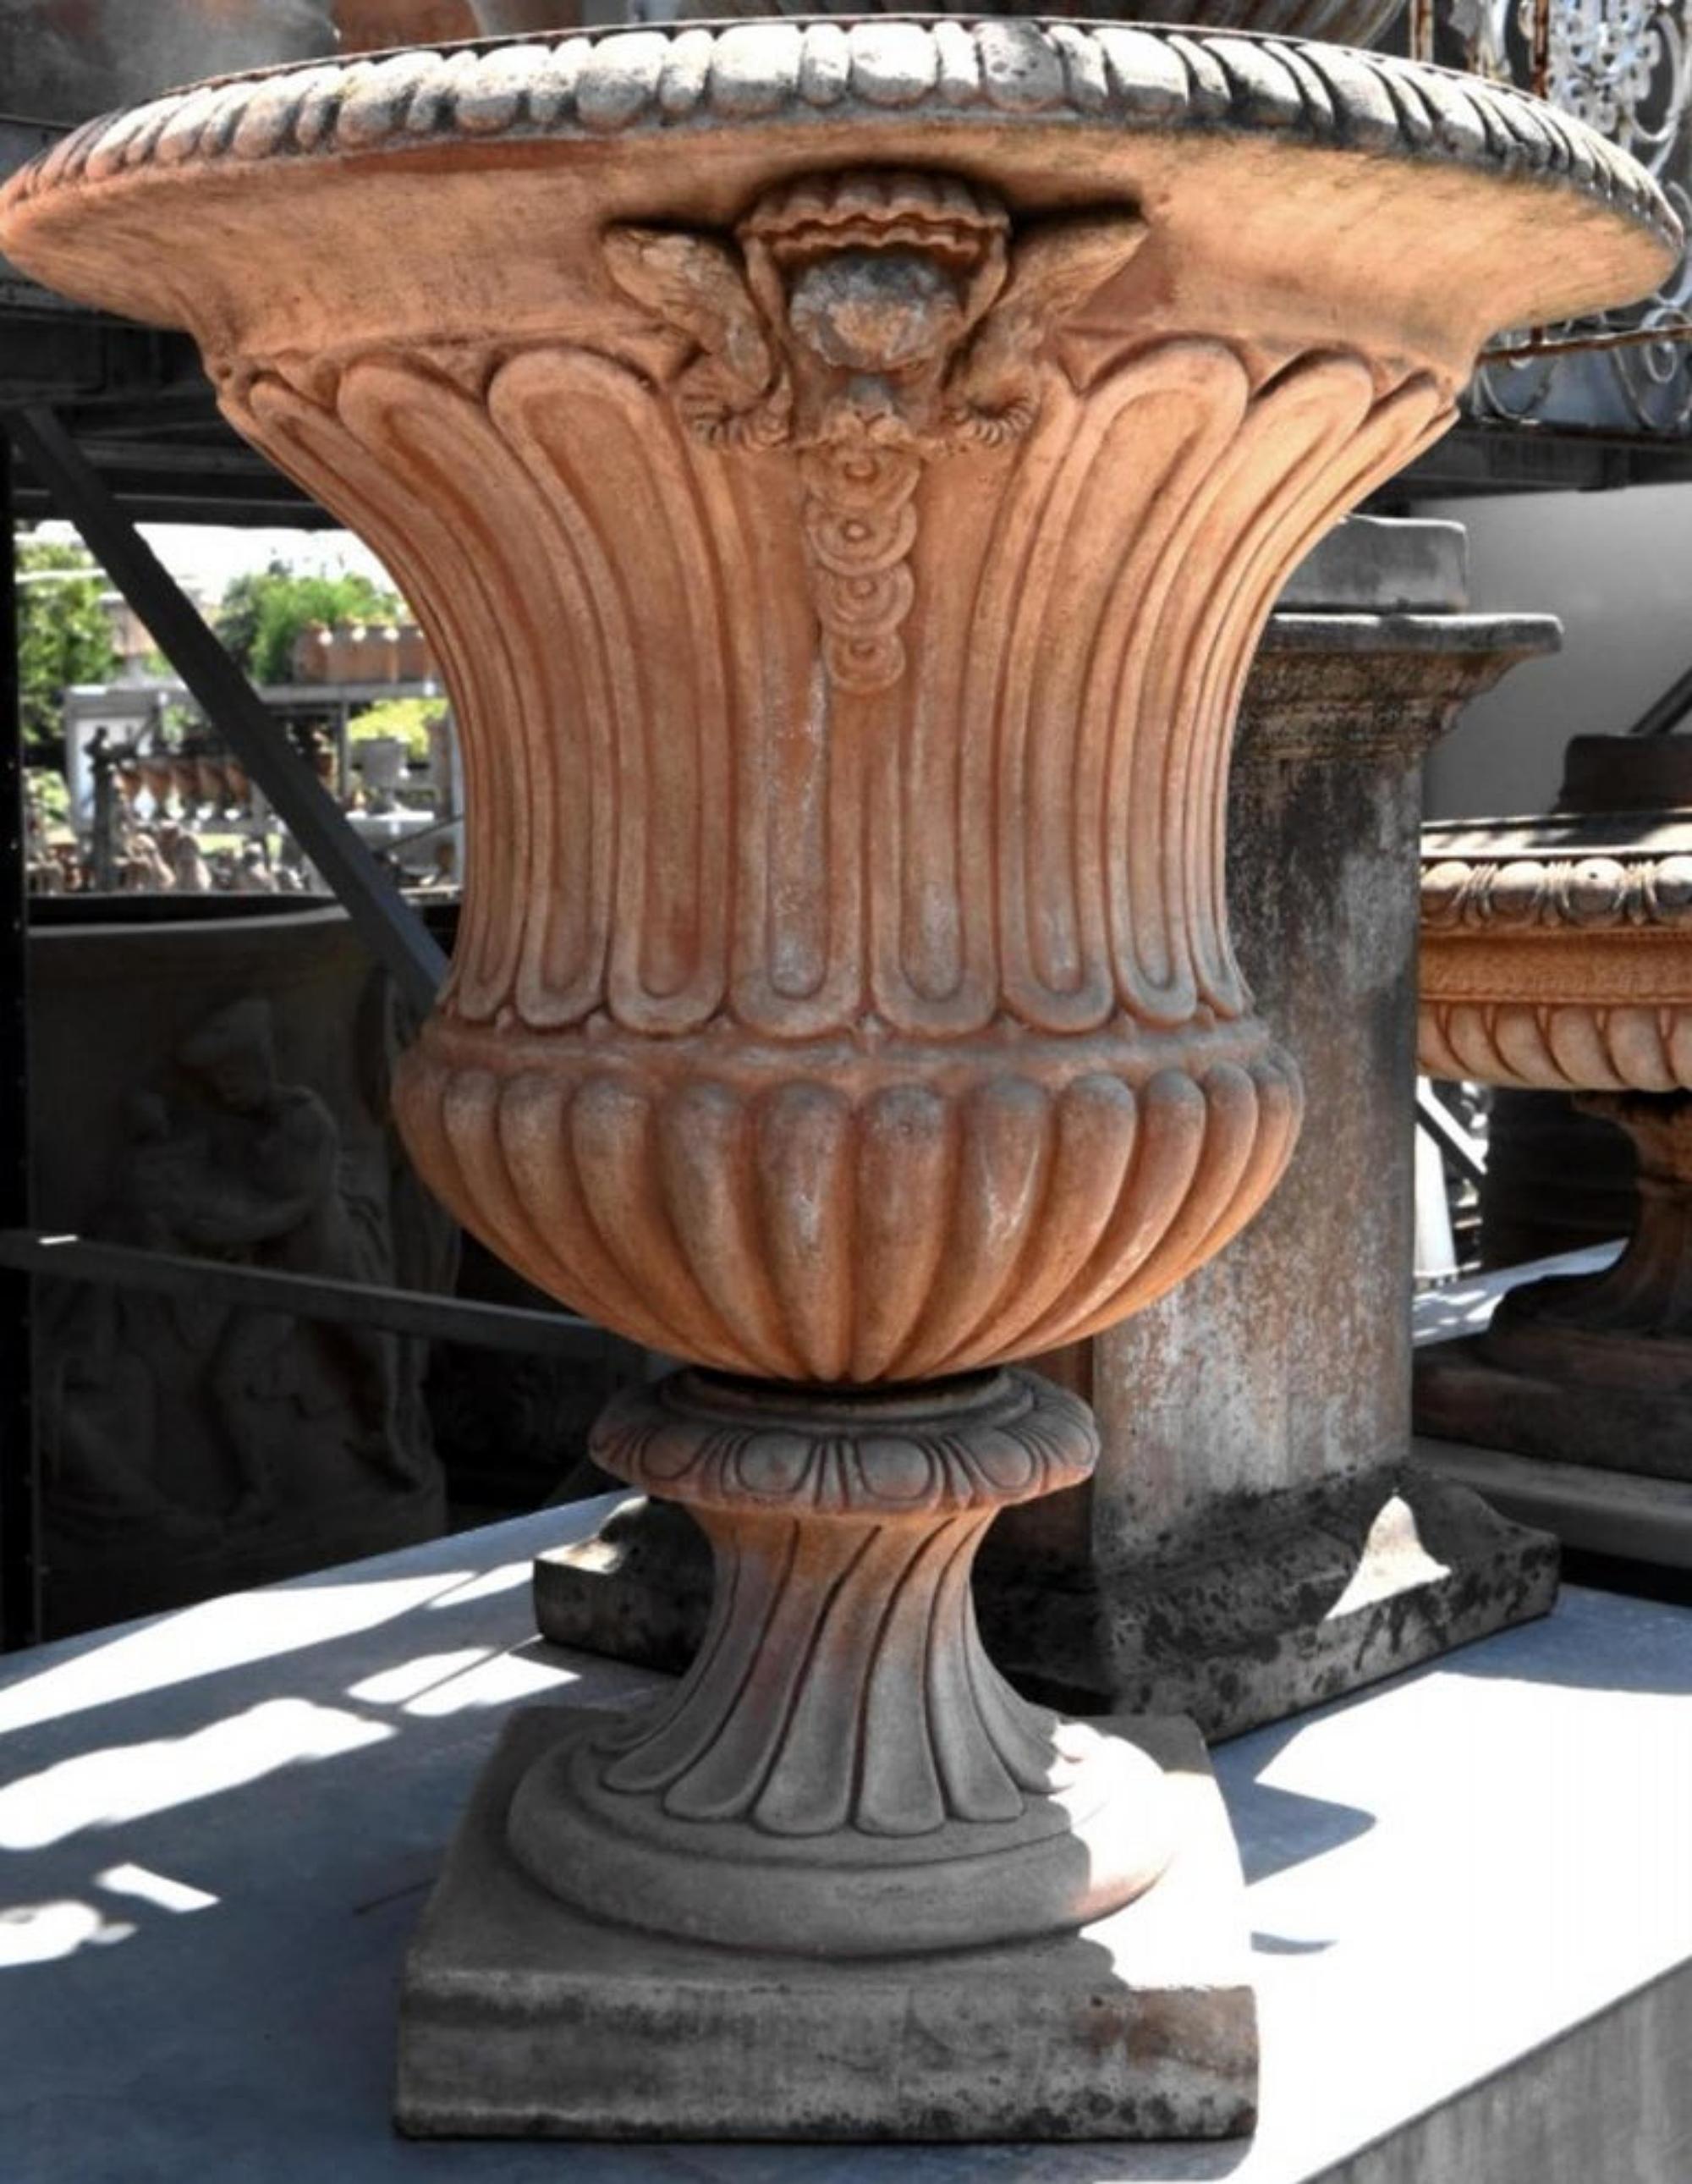 Italian Large Mediceo Vase Baccellato Terracotta Goblet, Early 20th Century For Sale